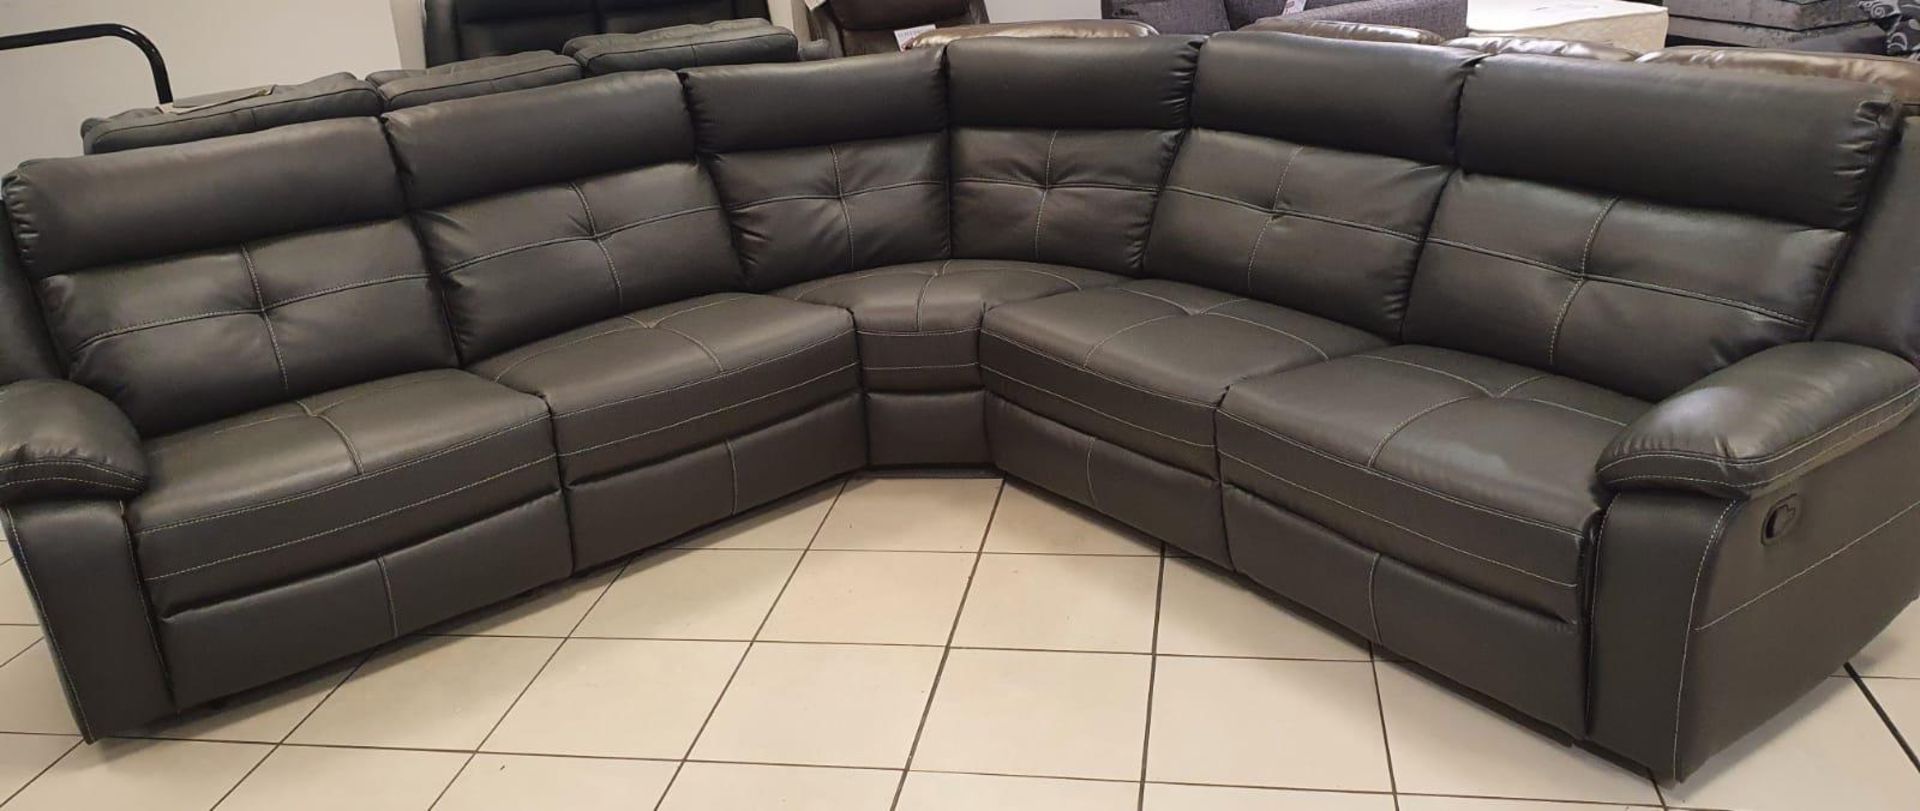 Brand new boxed langdale grey leather reclining corner sofa